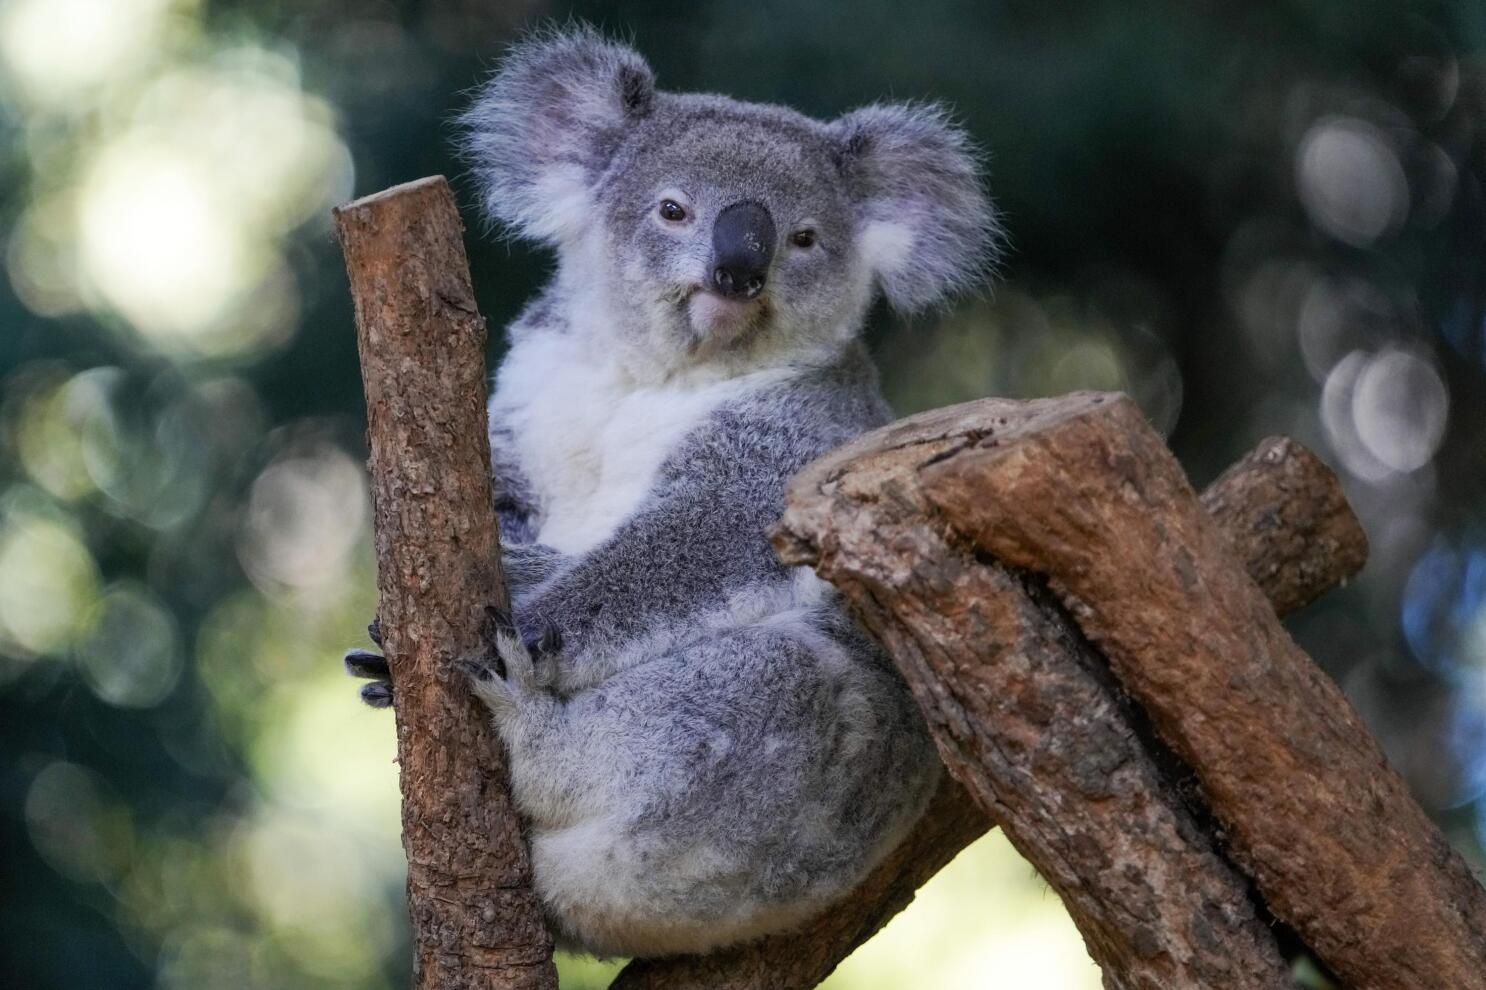 Koalas are dying from chlamydia. A new vaccine effort is trying to